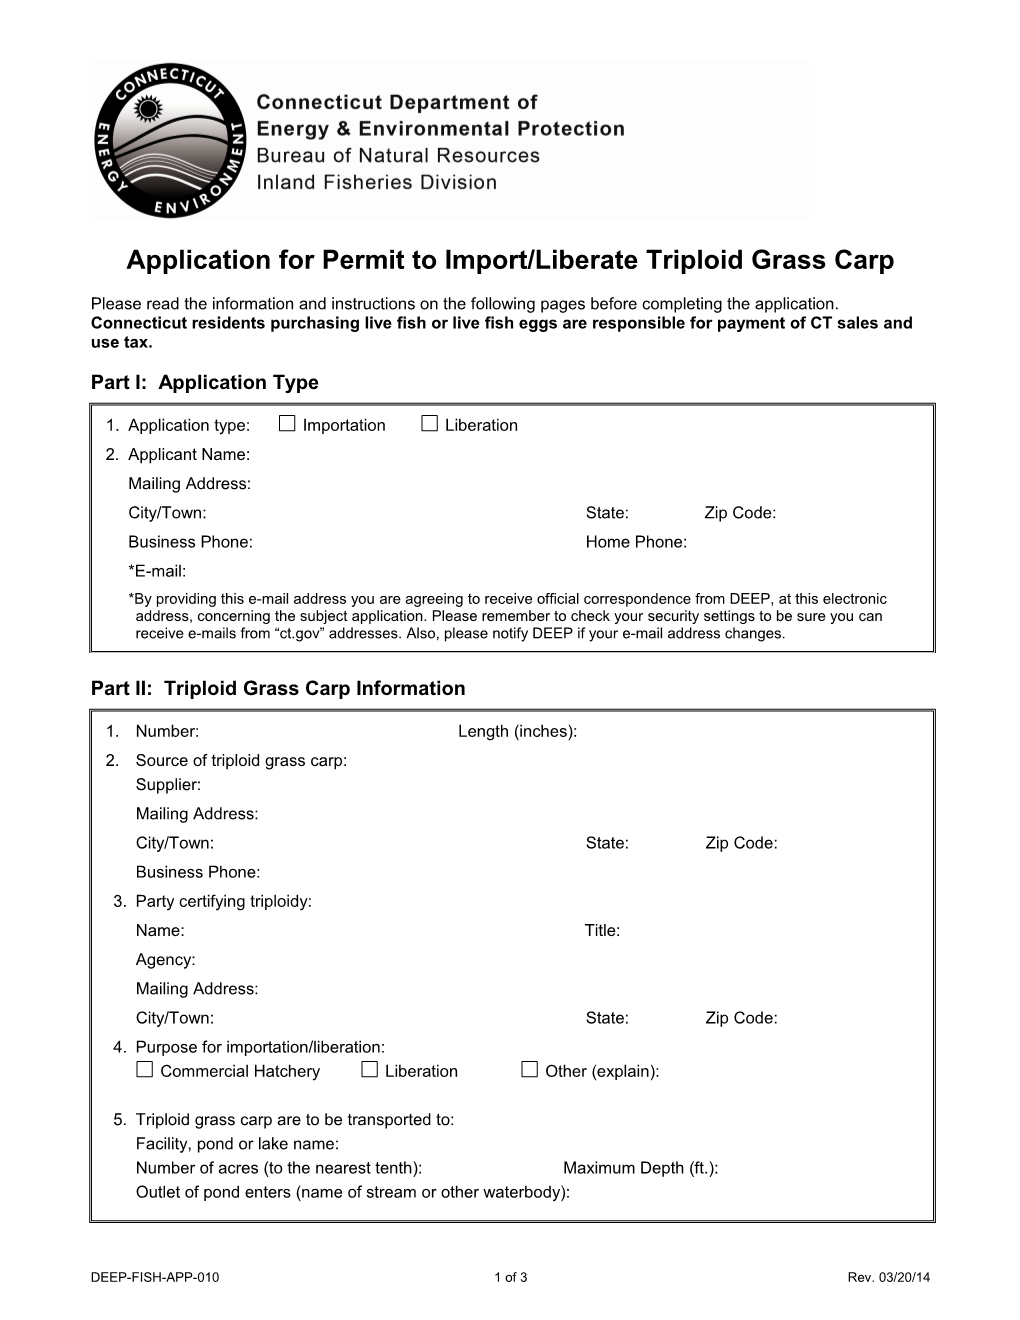 Application for Permit to Import/Liberate Triploid Grass Carp